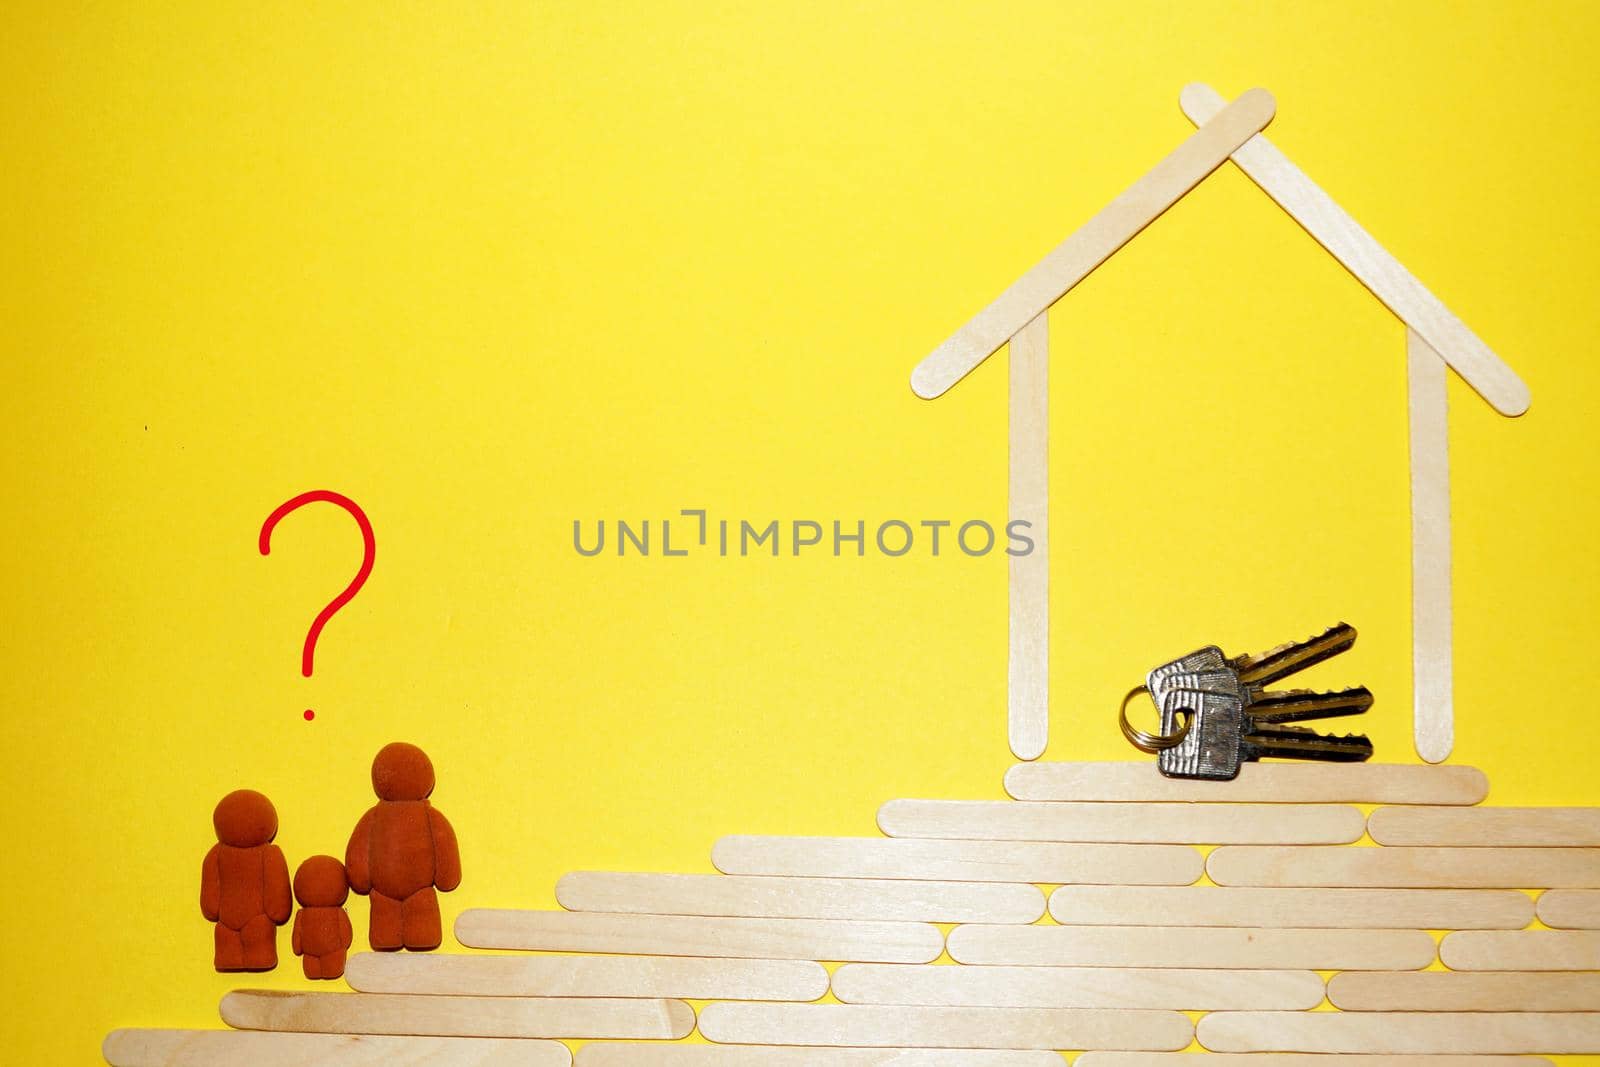 figurines of a man, woman and child climb the stairs, there is a question mark above them, to the house with keys, mortgage concept.